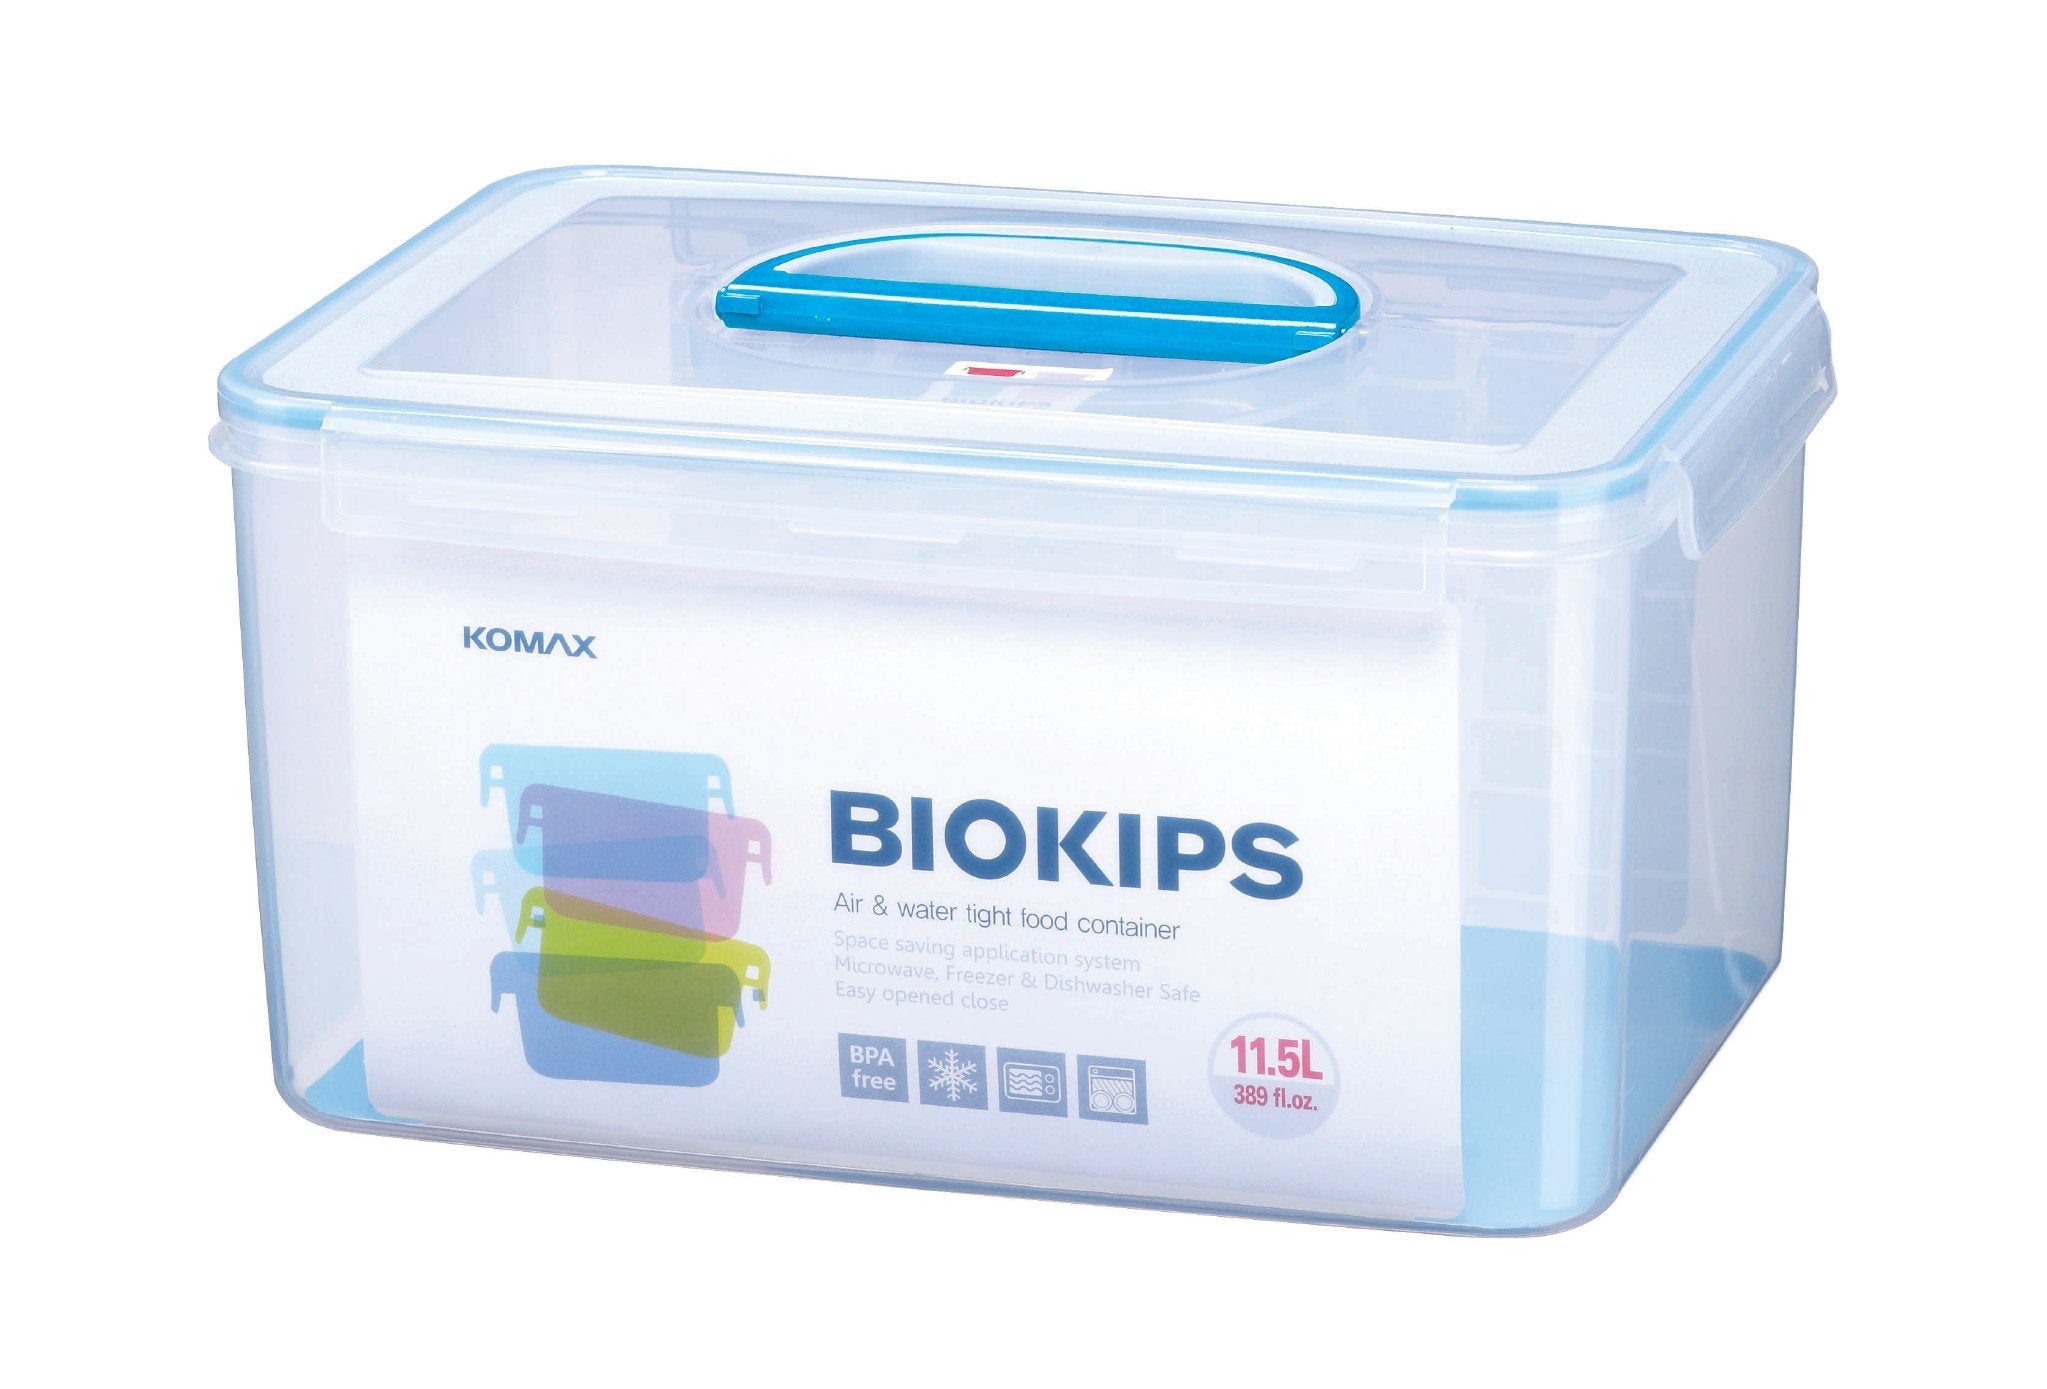 Komax Biokips Rectangular Food Storage Container With One Handle, 11.5 L